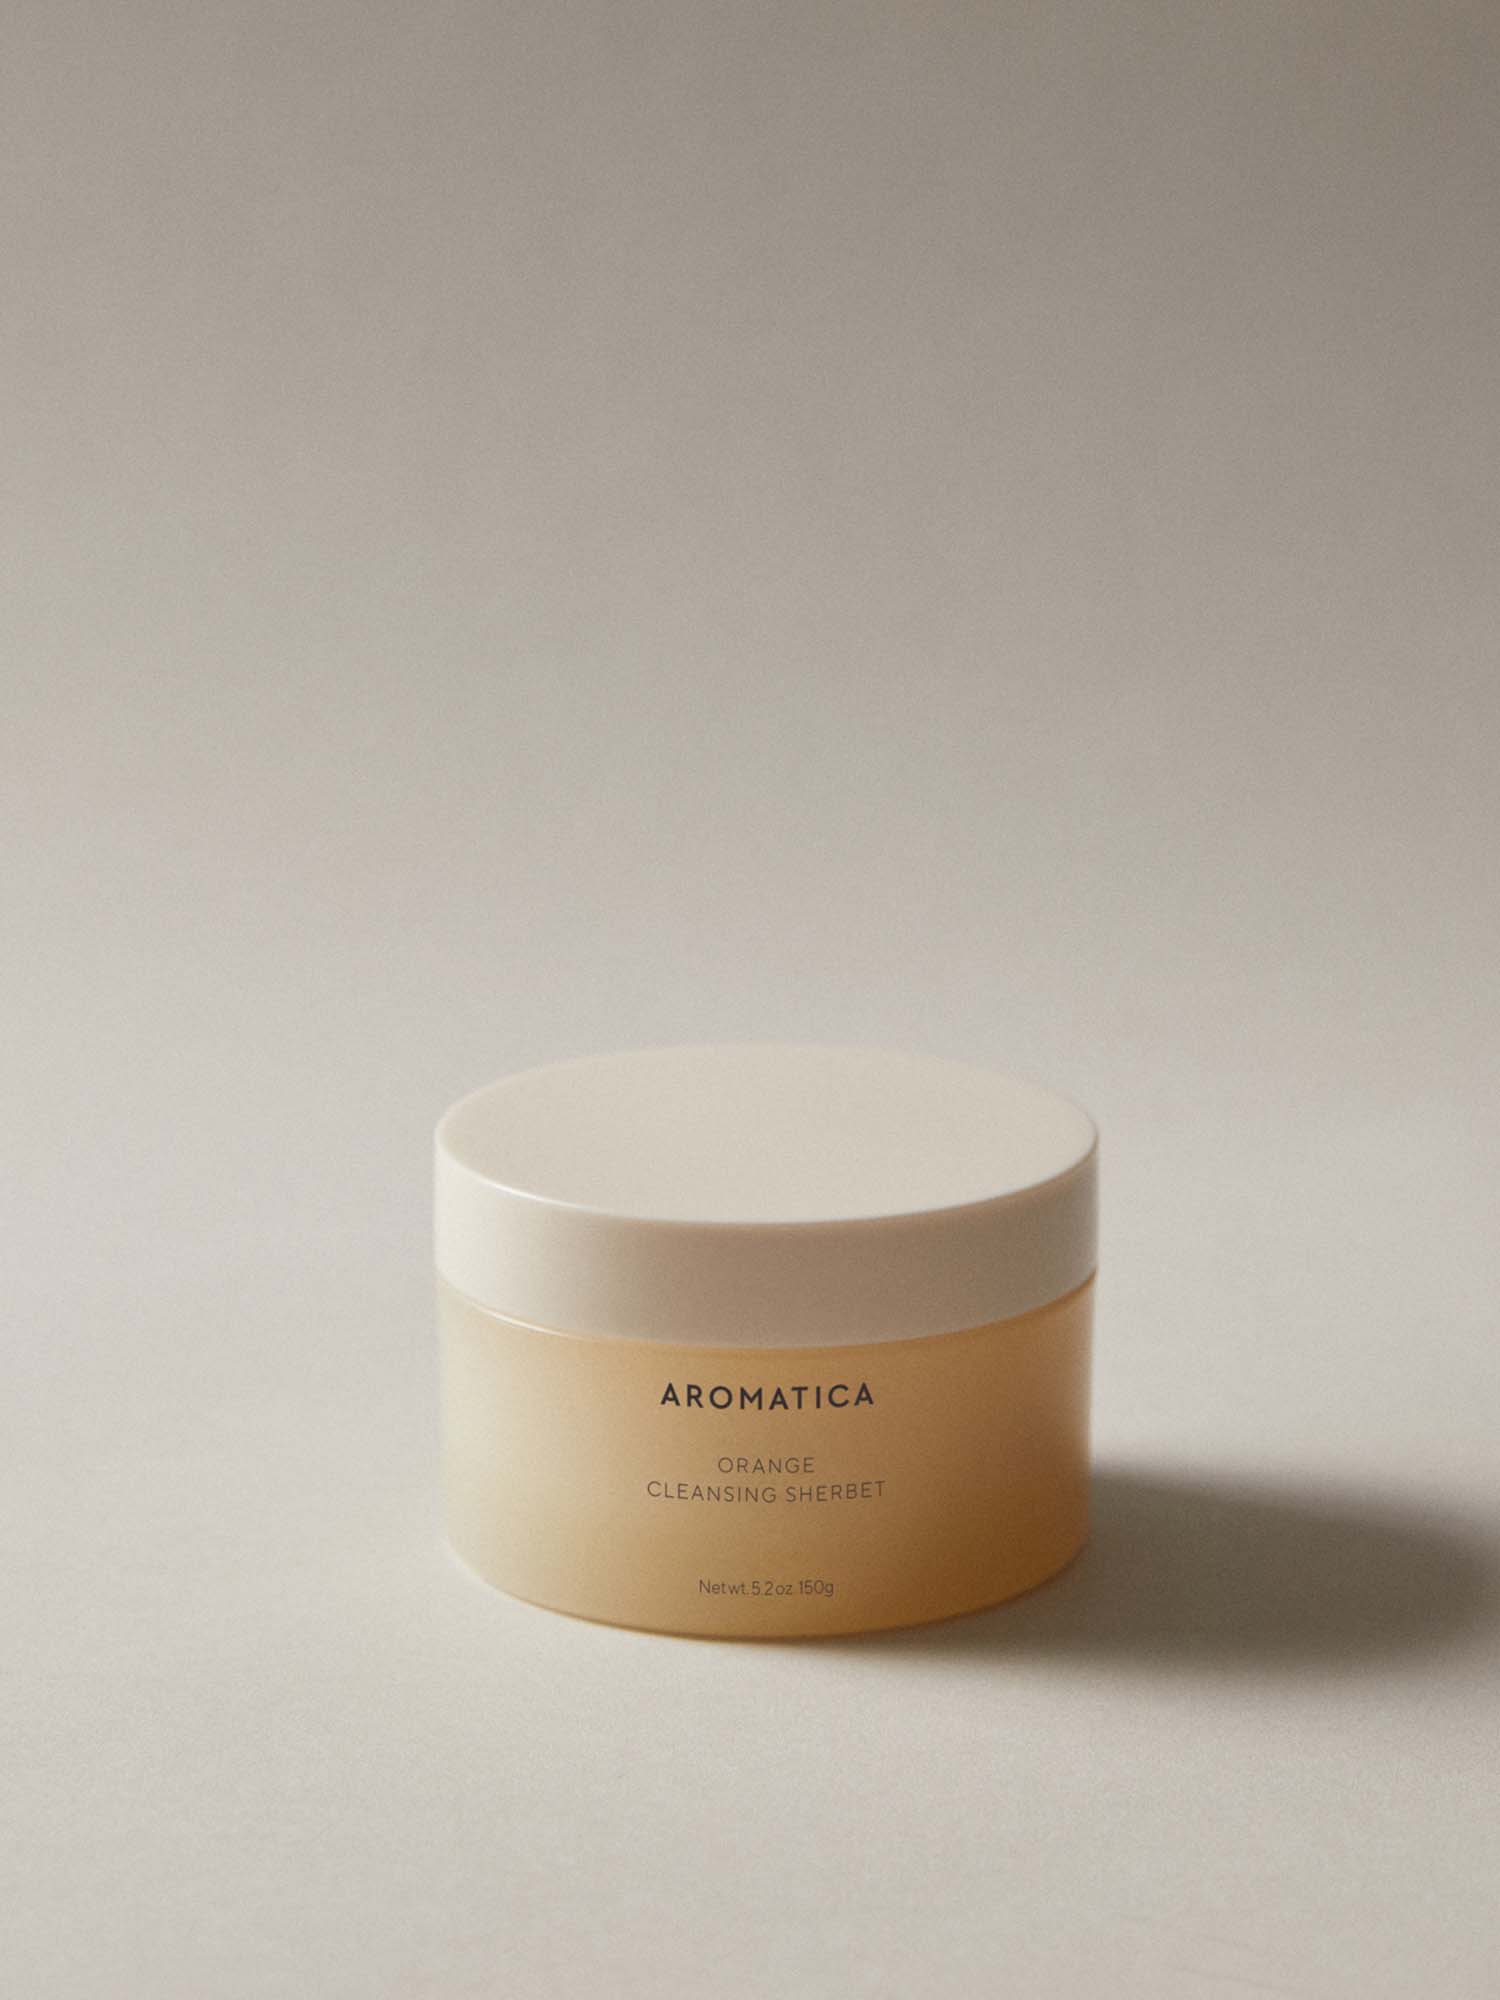 AROMATICA Products, 10251 votes - Shop & Review